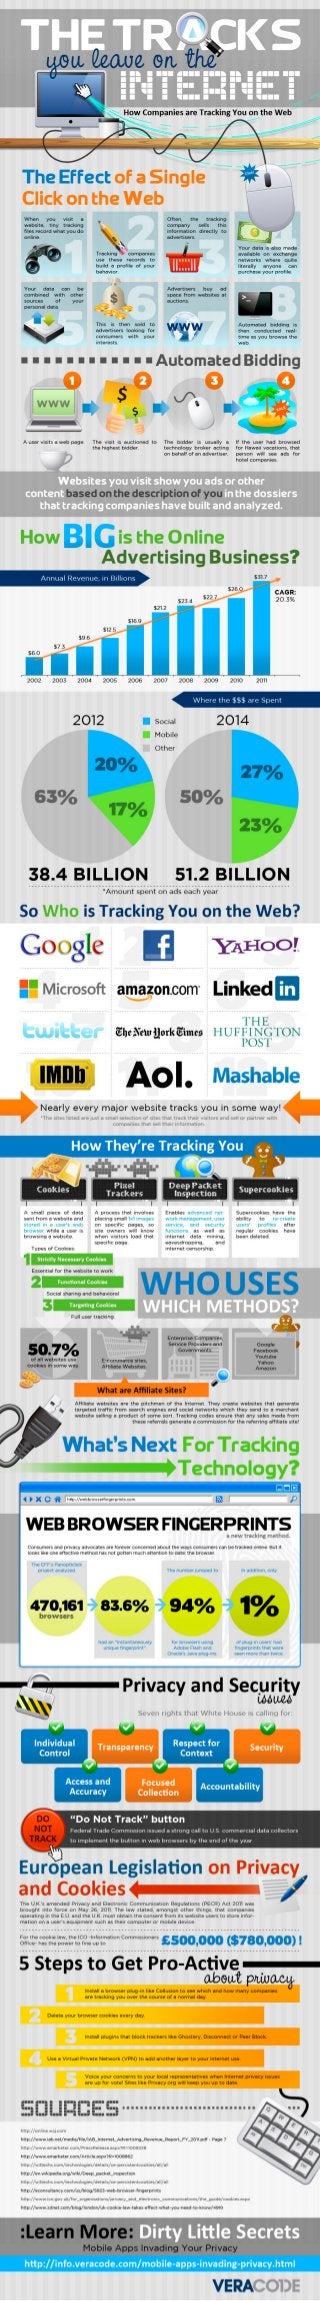 Infographic - How Companies Track You on the Web